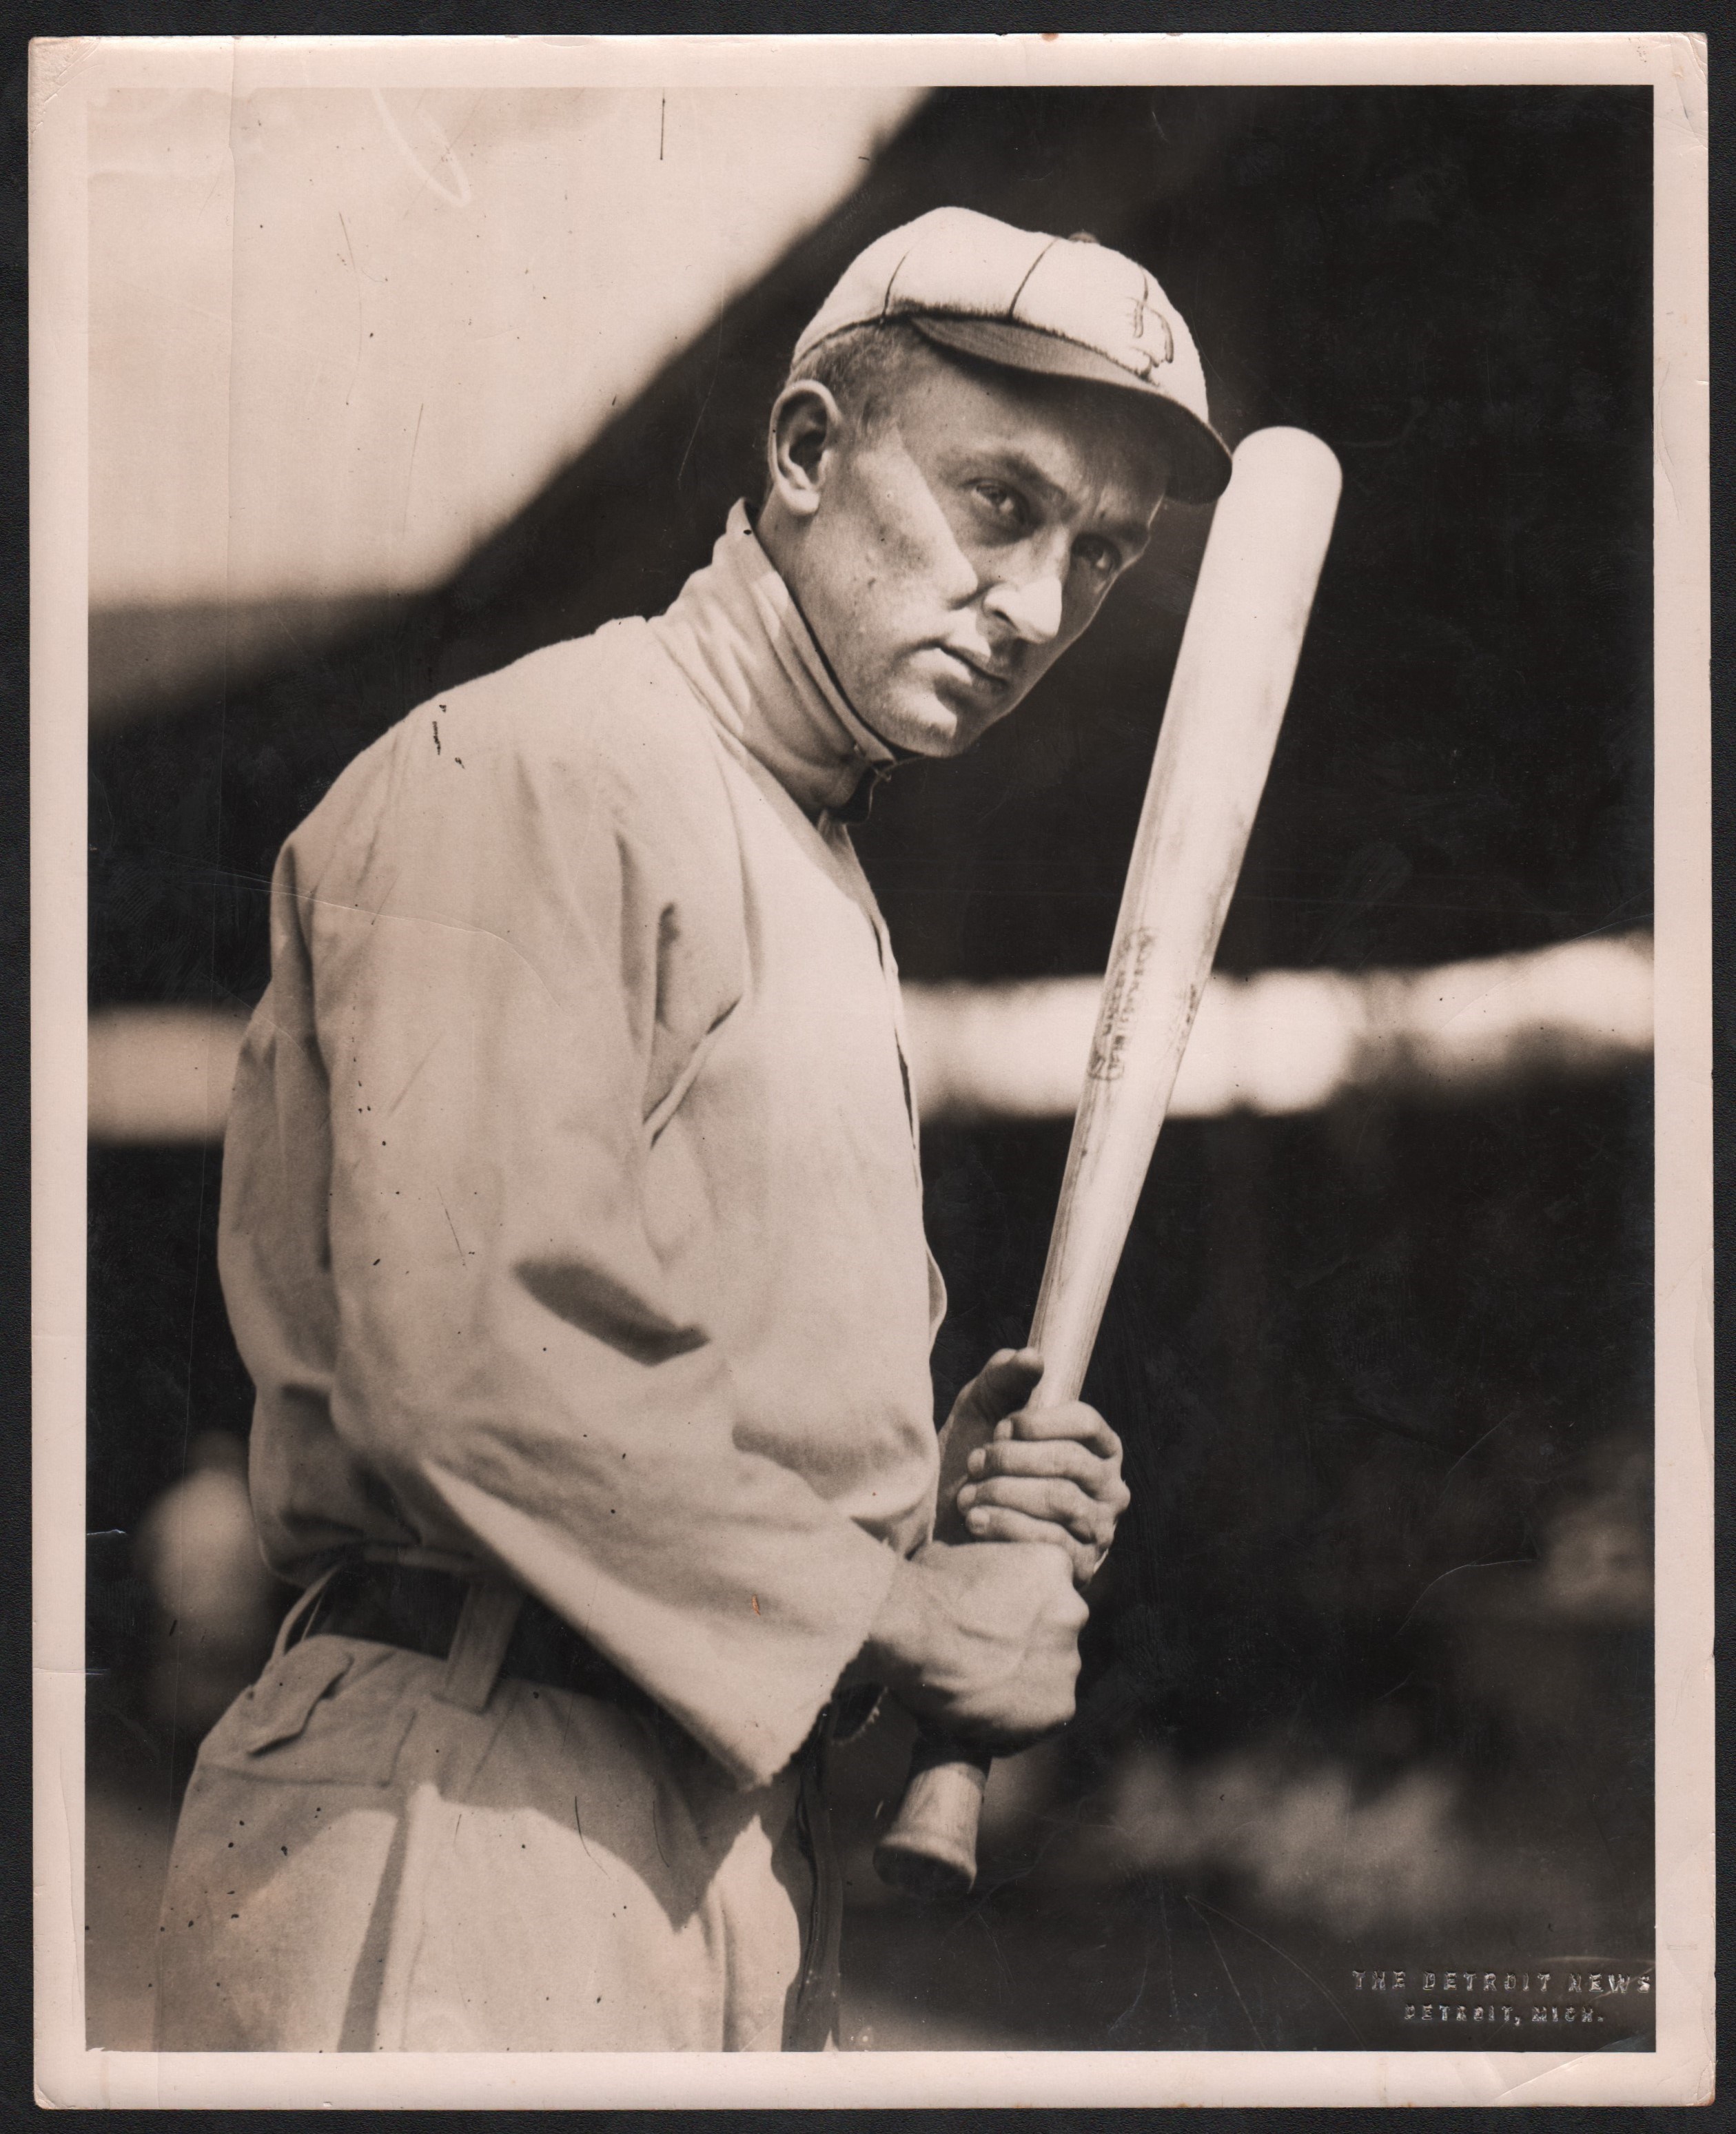 - Ty Cobb Photograph Used in T206 Baseball Card (PSA/DNA)